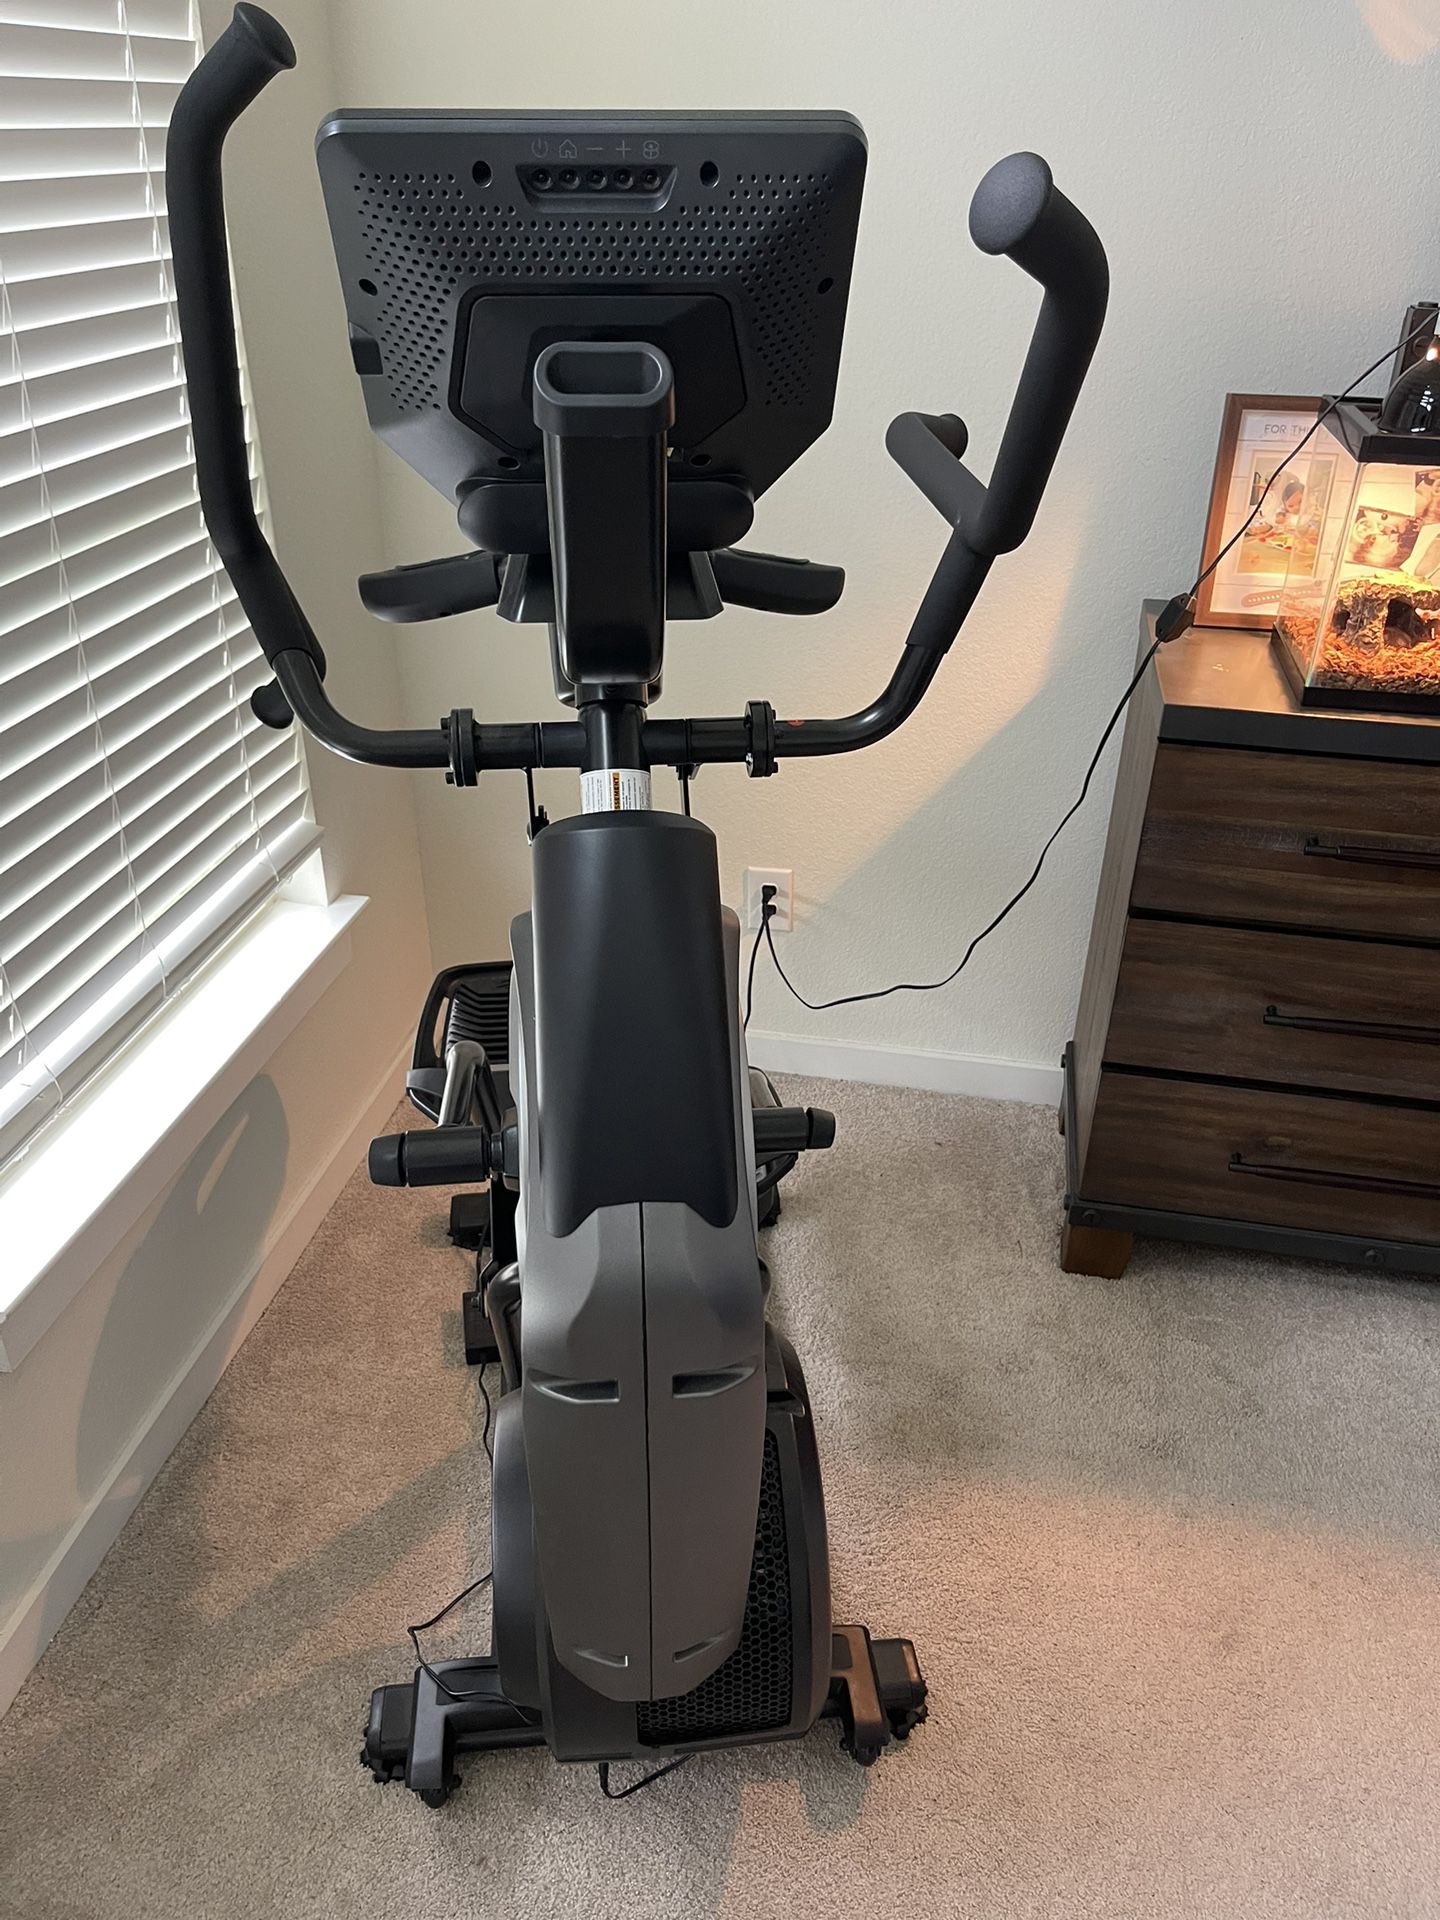 Max Total 16 Work Out Machine For Sale/or Best Offer 